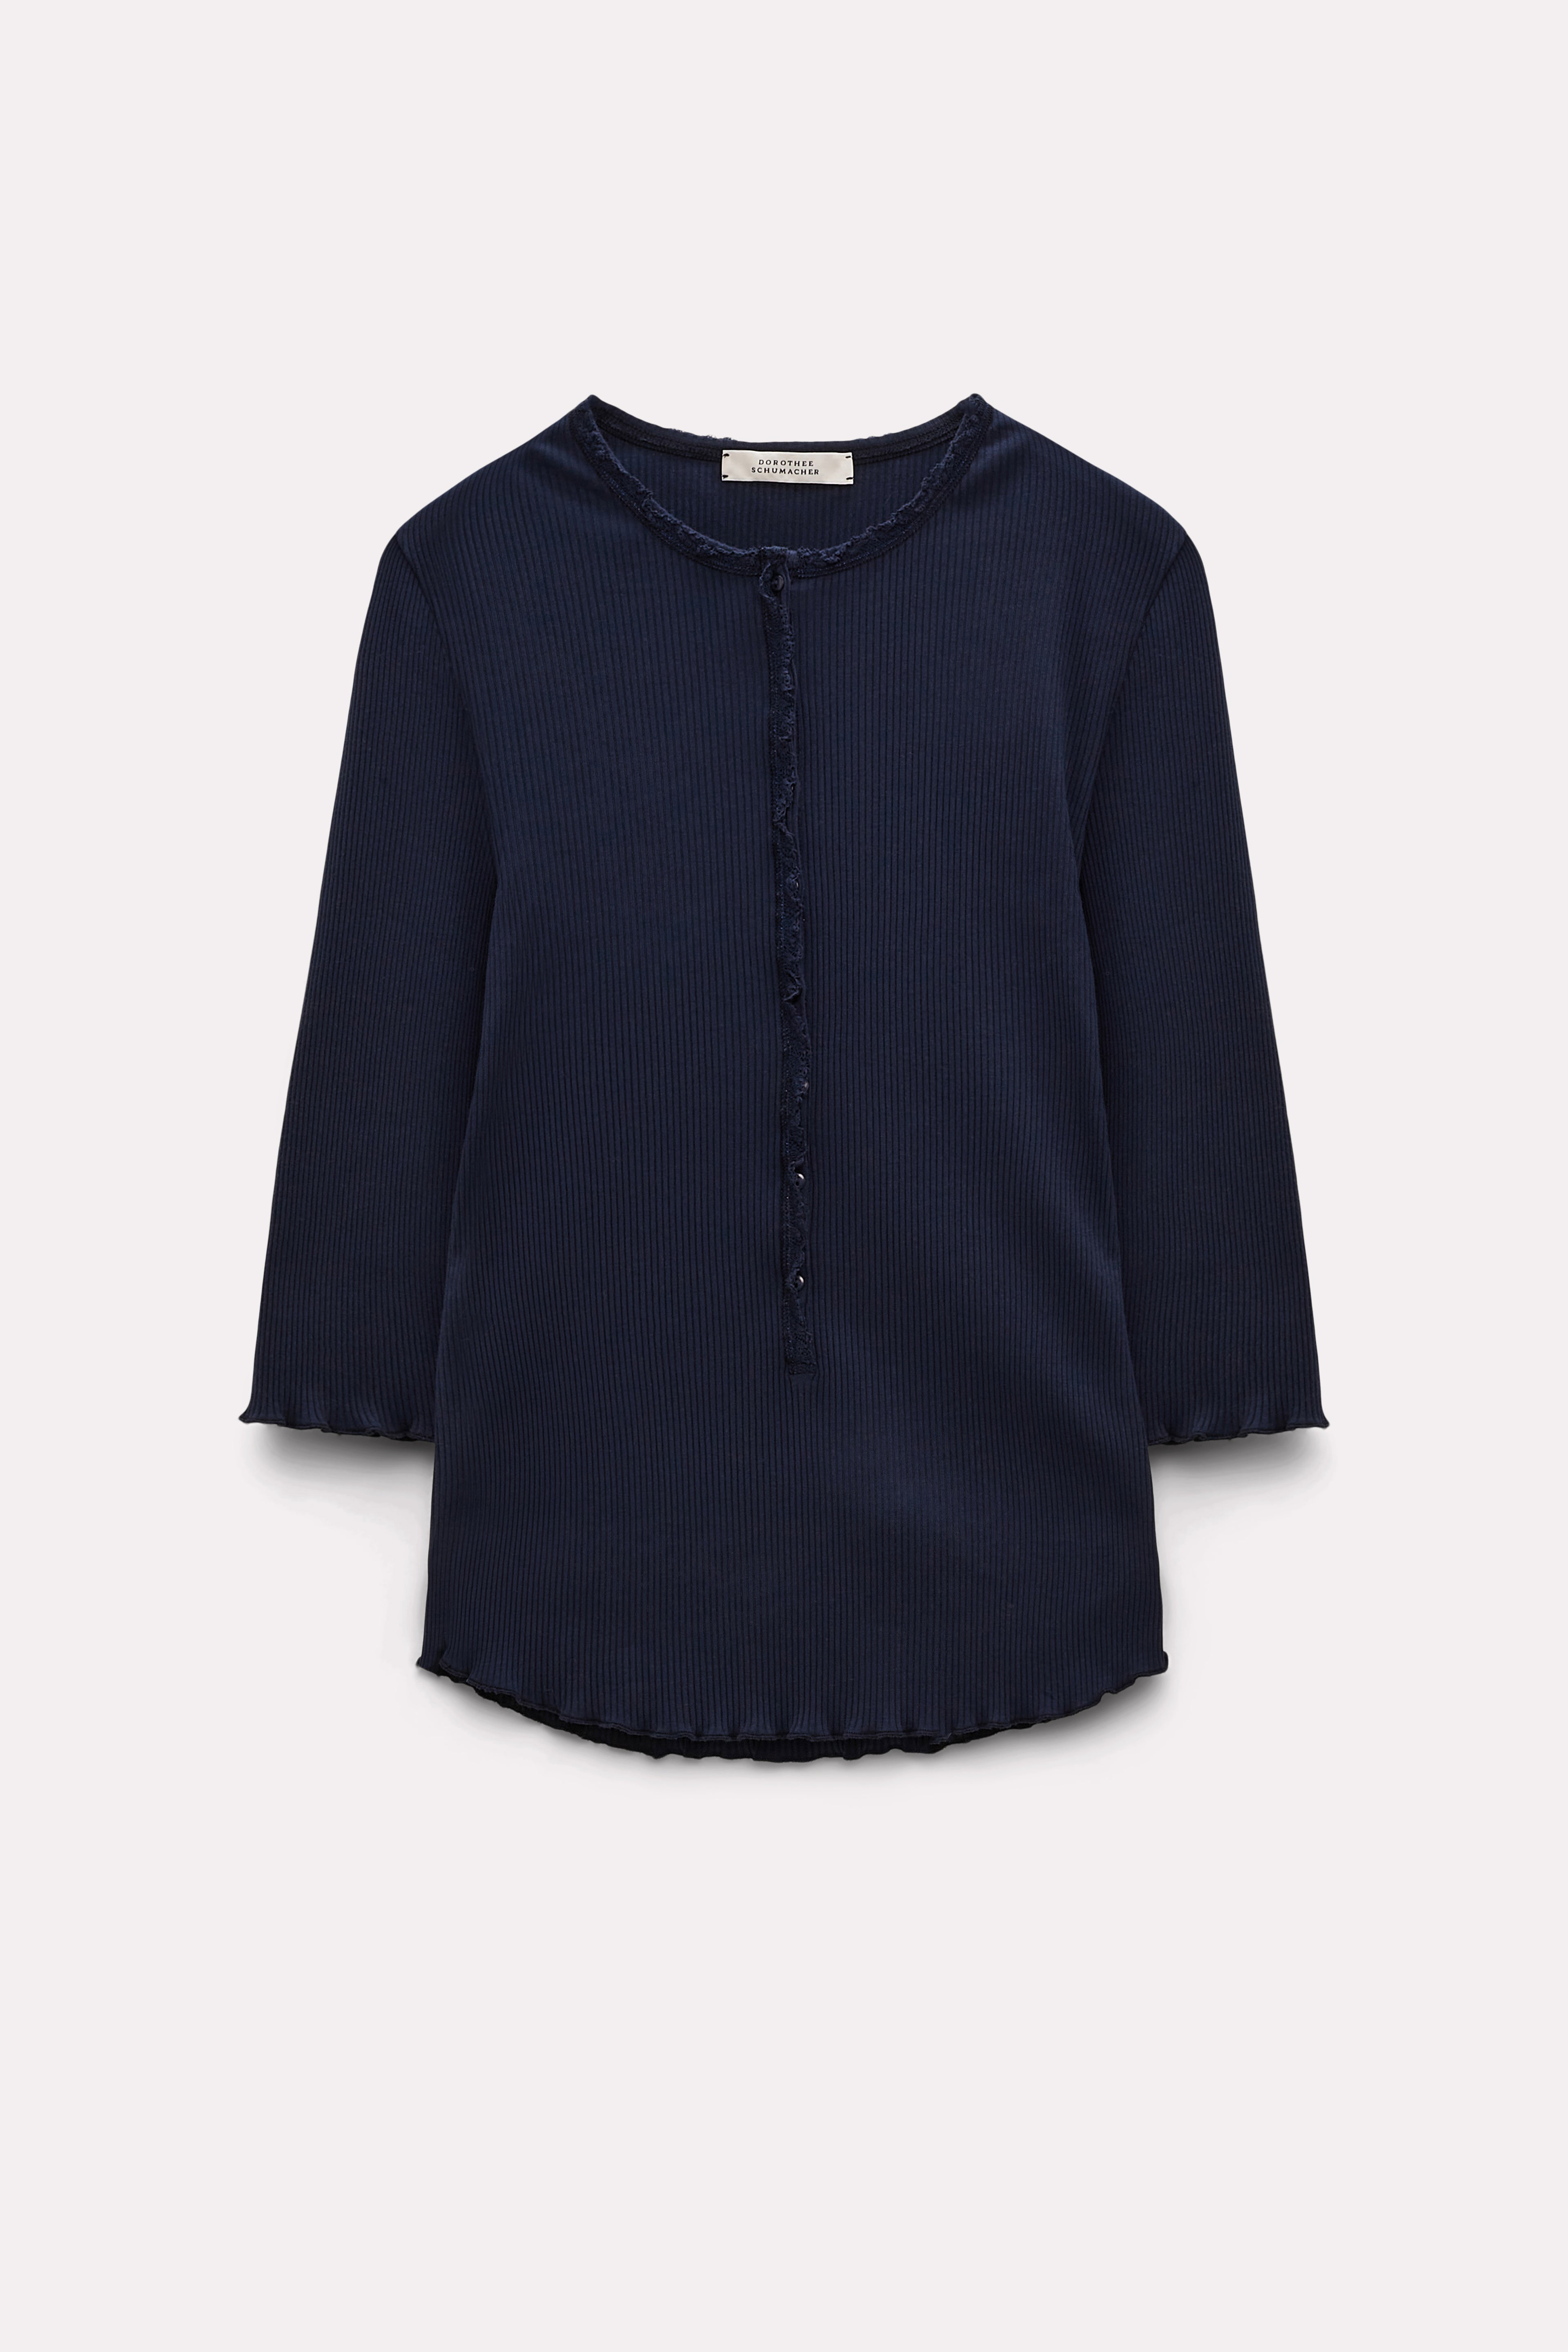 Dorothee-Schumacher-OUTLET-SALE-SOFT-RIB-shirt-Shirts-ARCHIVE-COLLECTION_6c62daa8-691e-498a-ad17-1c241701c570.jpg